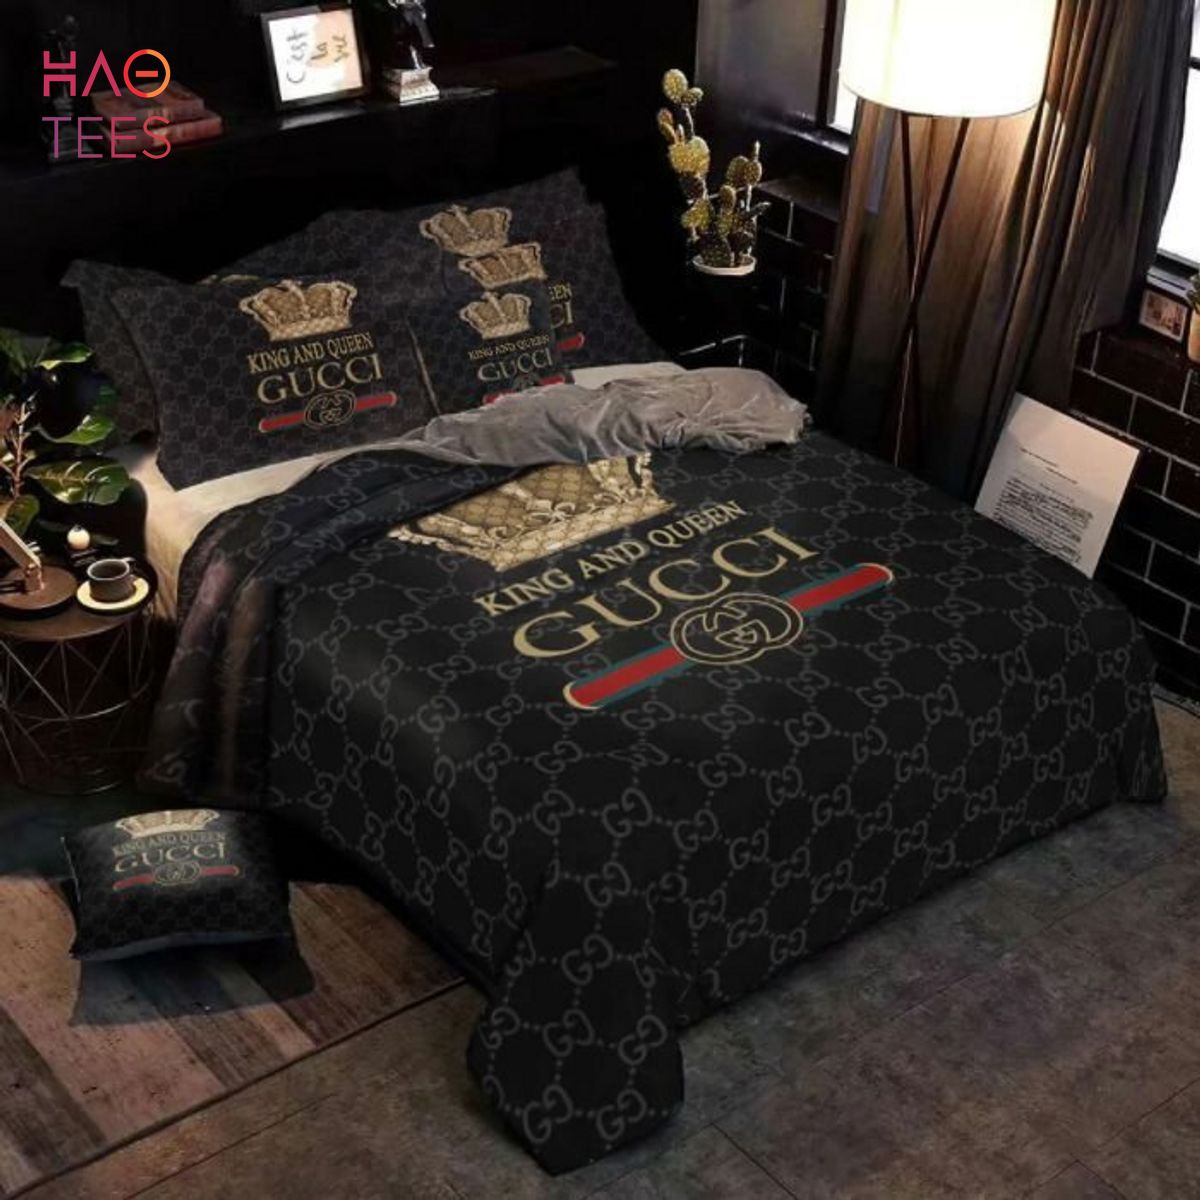 Louis Vuitton Luxury Brand white and gray bedding set, by Kybershop  Trending Fashion